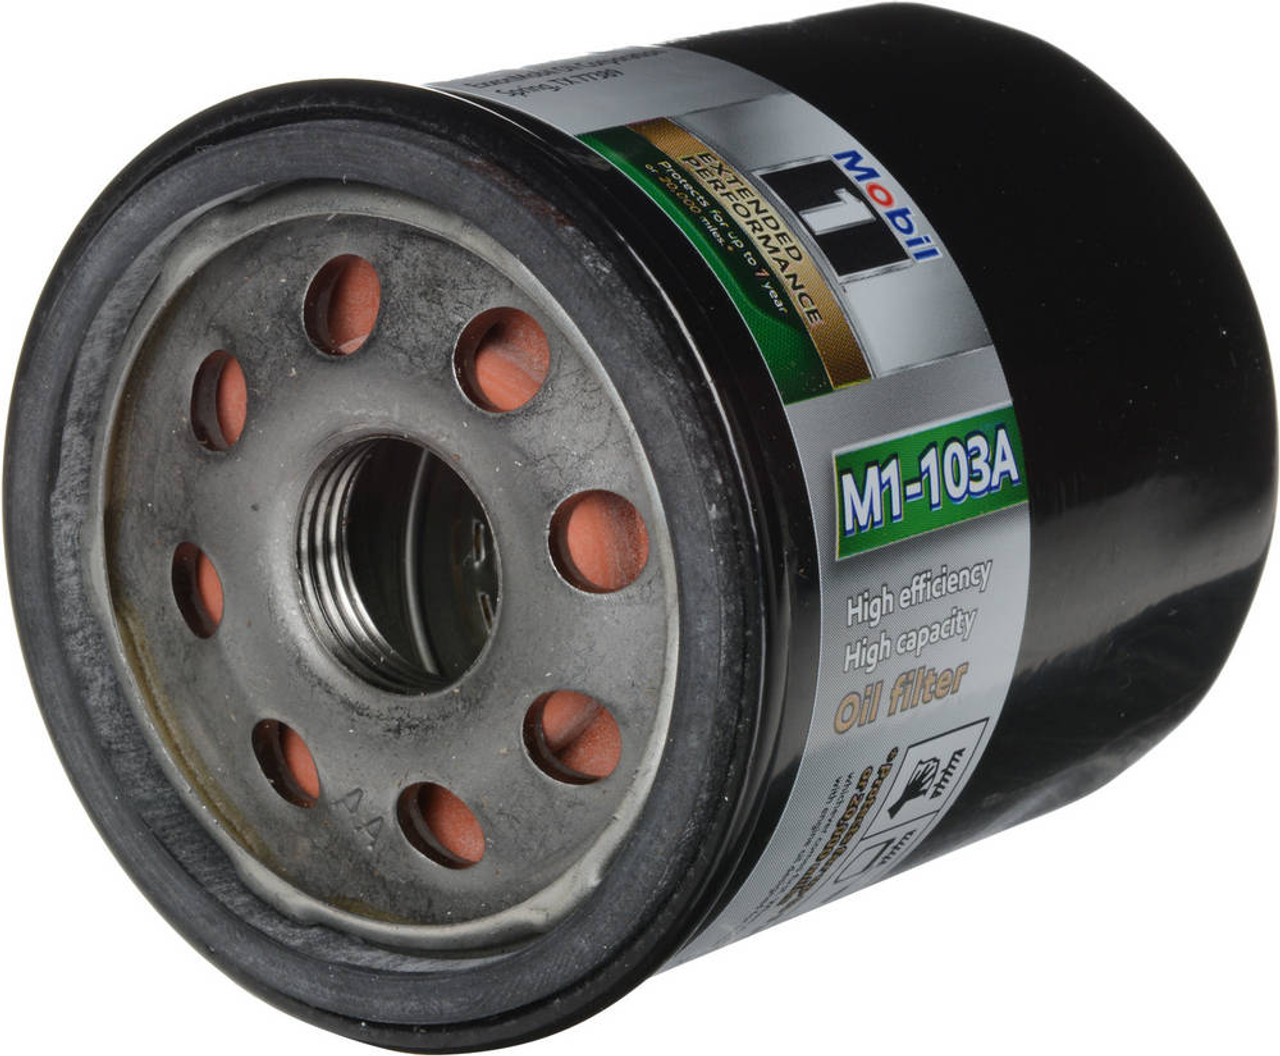 Mobil 1 Mobil 1 Extended Perform ance Oil Filter M1-103A - MOBM1-103A